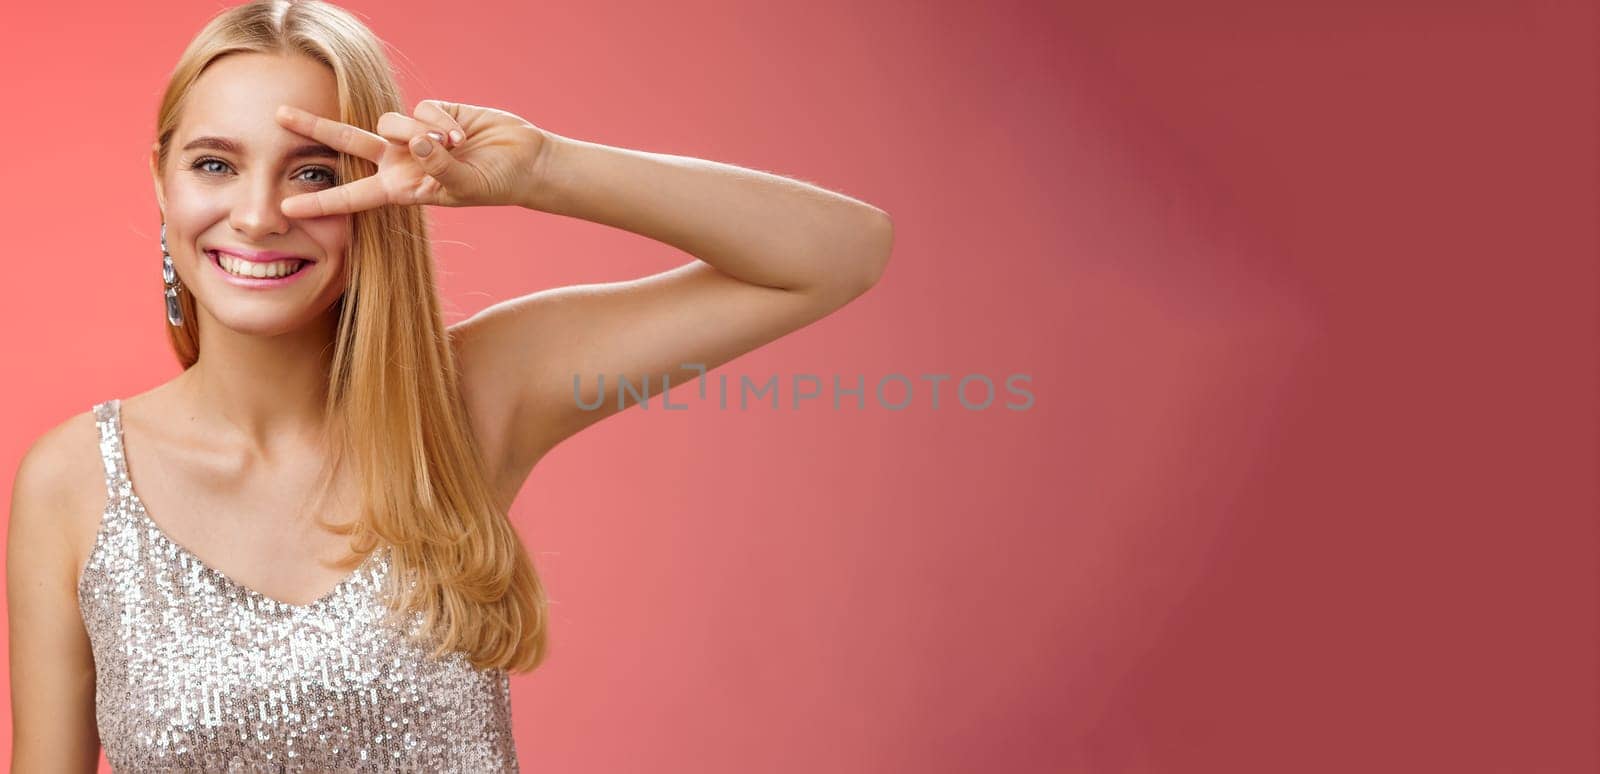 Lifestyle. Joyful carefree attractive confident blond woman in stylish silver dress show disco sign victory peace gesture near eye smiling having fun enjoying awesome party grinning dancing red background.